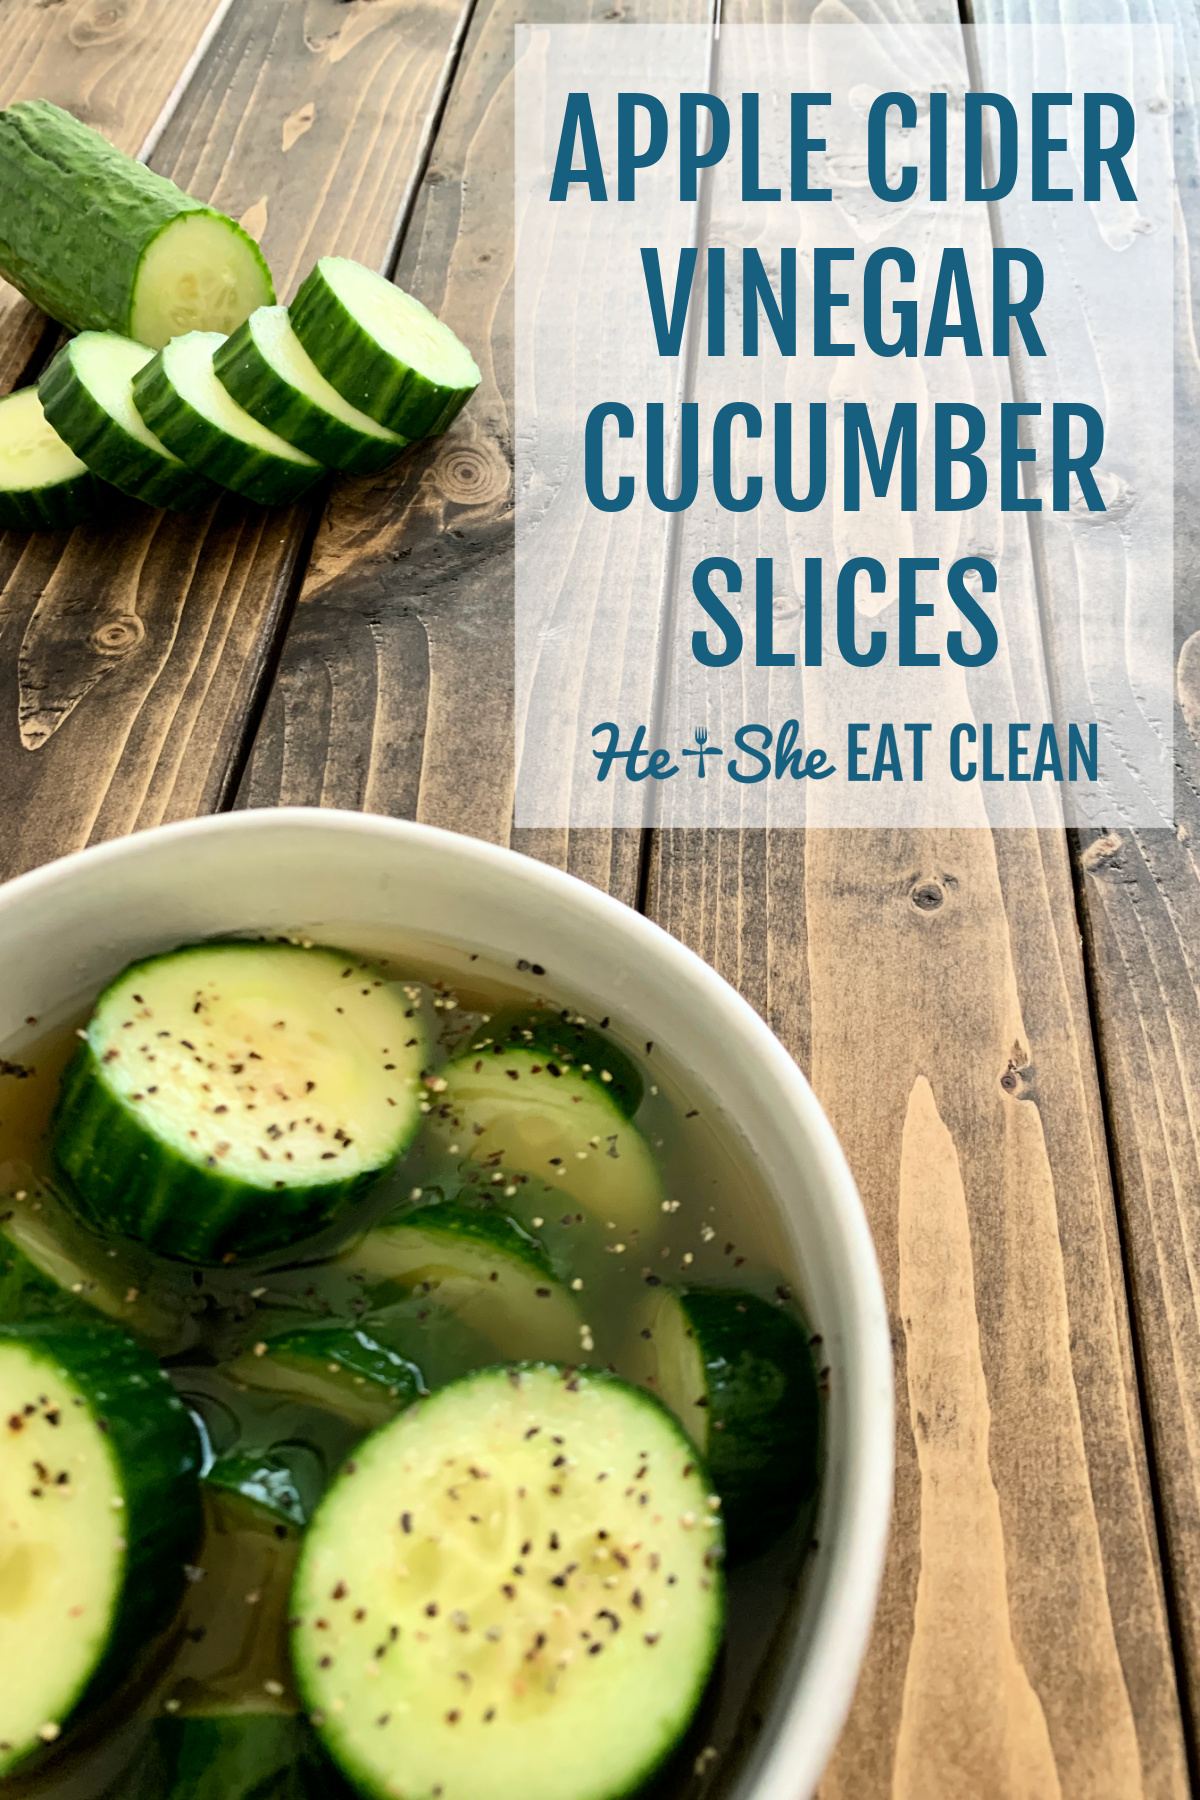 cucumber slices in a bowl with apple cider vinegar with sliced cucumbers on a wooden table